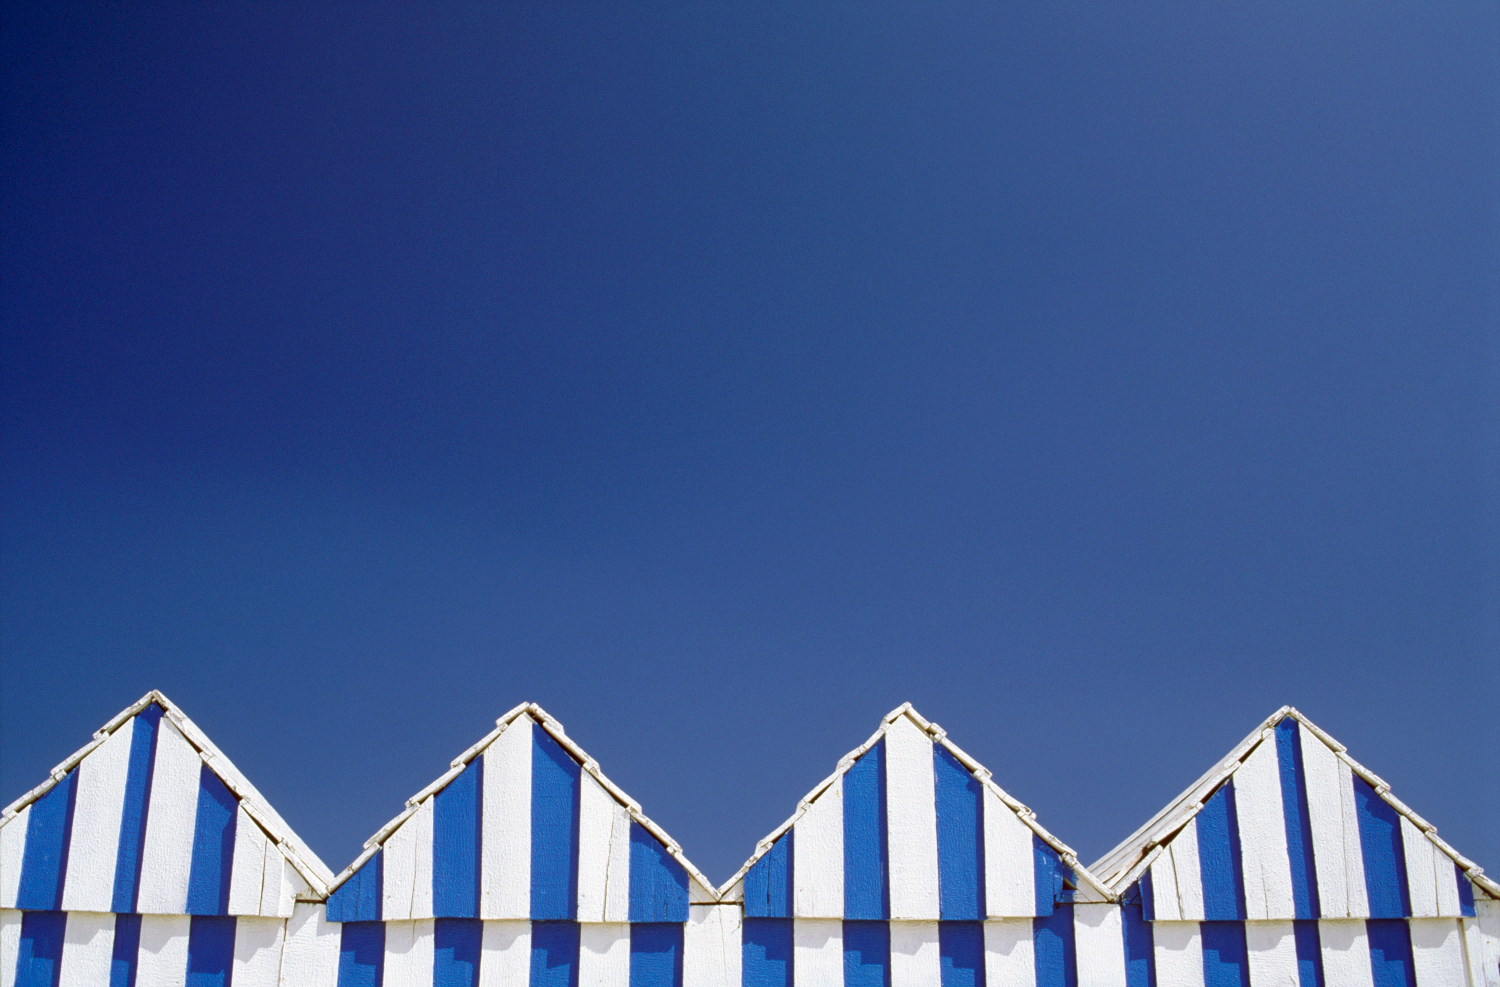 Beach huts huddle on Ilha de Tavira, where visitors can camp over. Image by Travel Ink / Gallo Images / Getty